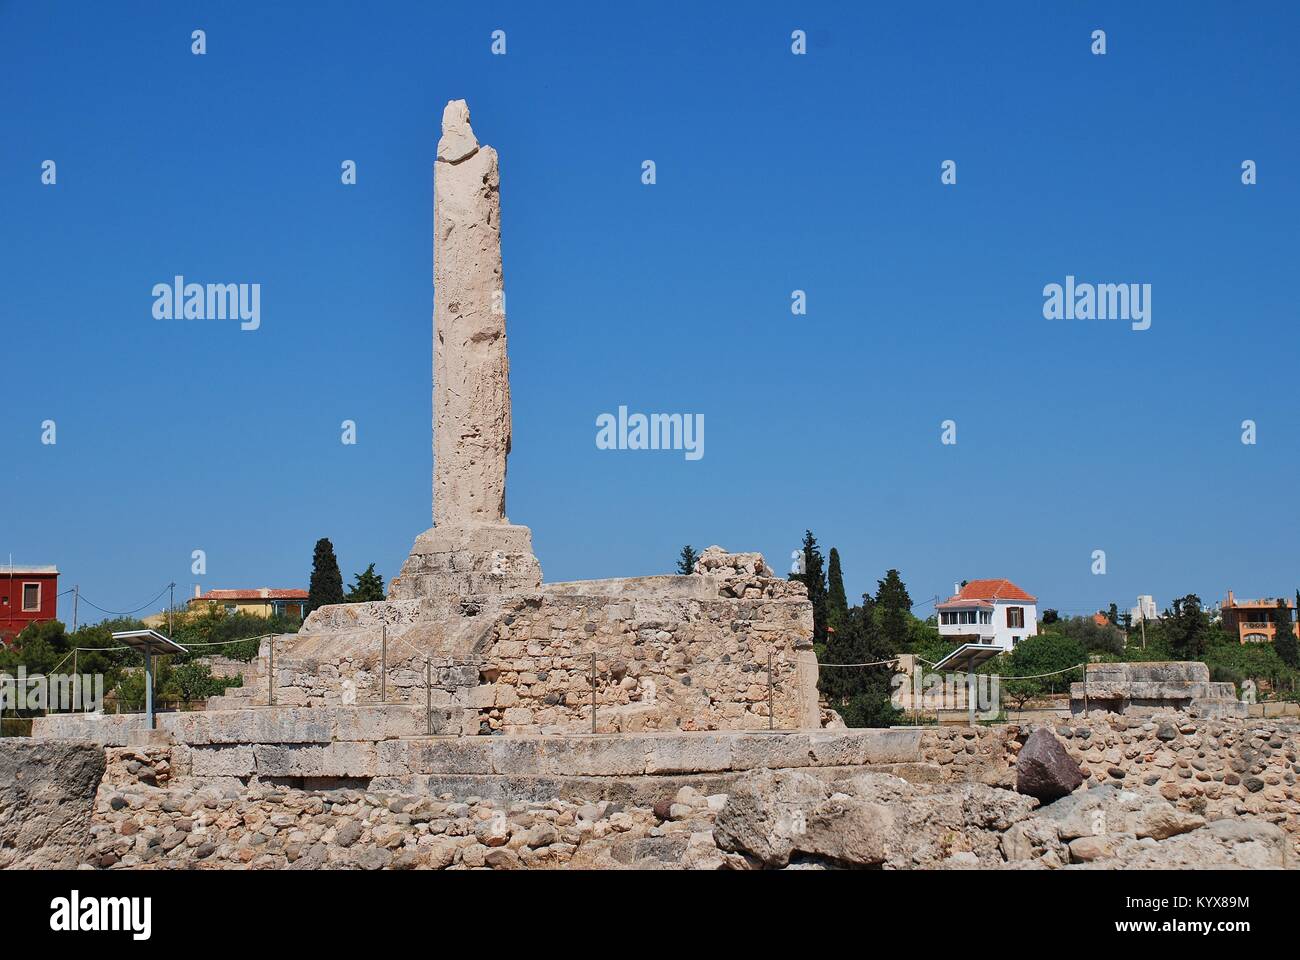 The remaining column of the Temple of Apollo at Aegina Town on the Greek island of Aegina. The ancient acropolis dates from circa 6th century BC. Stock Photo